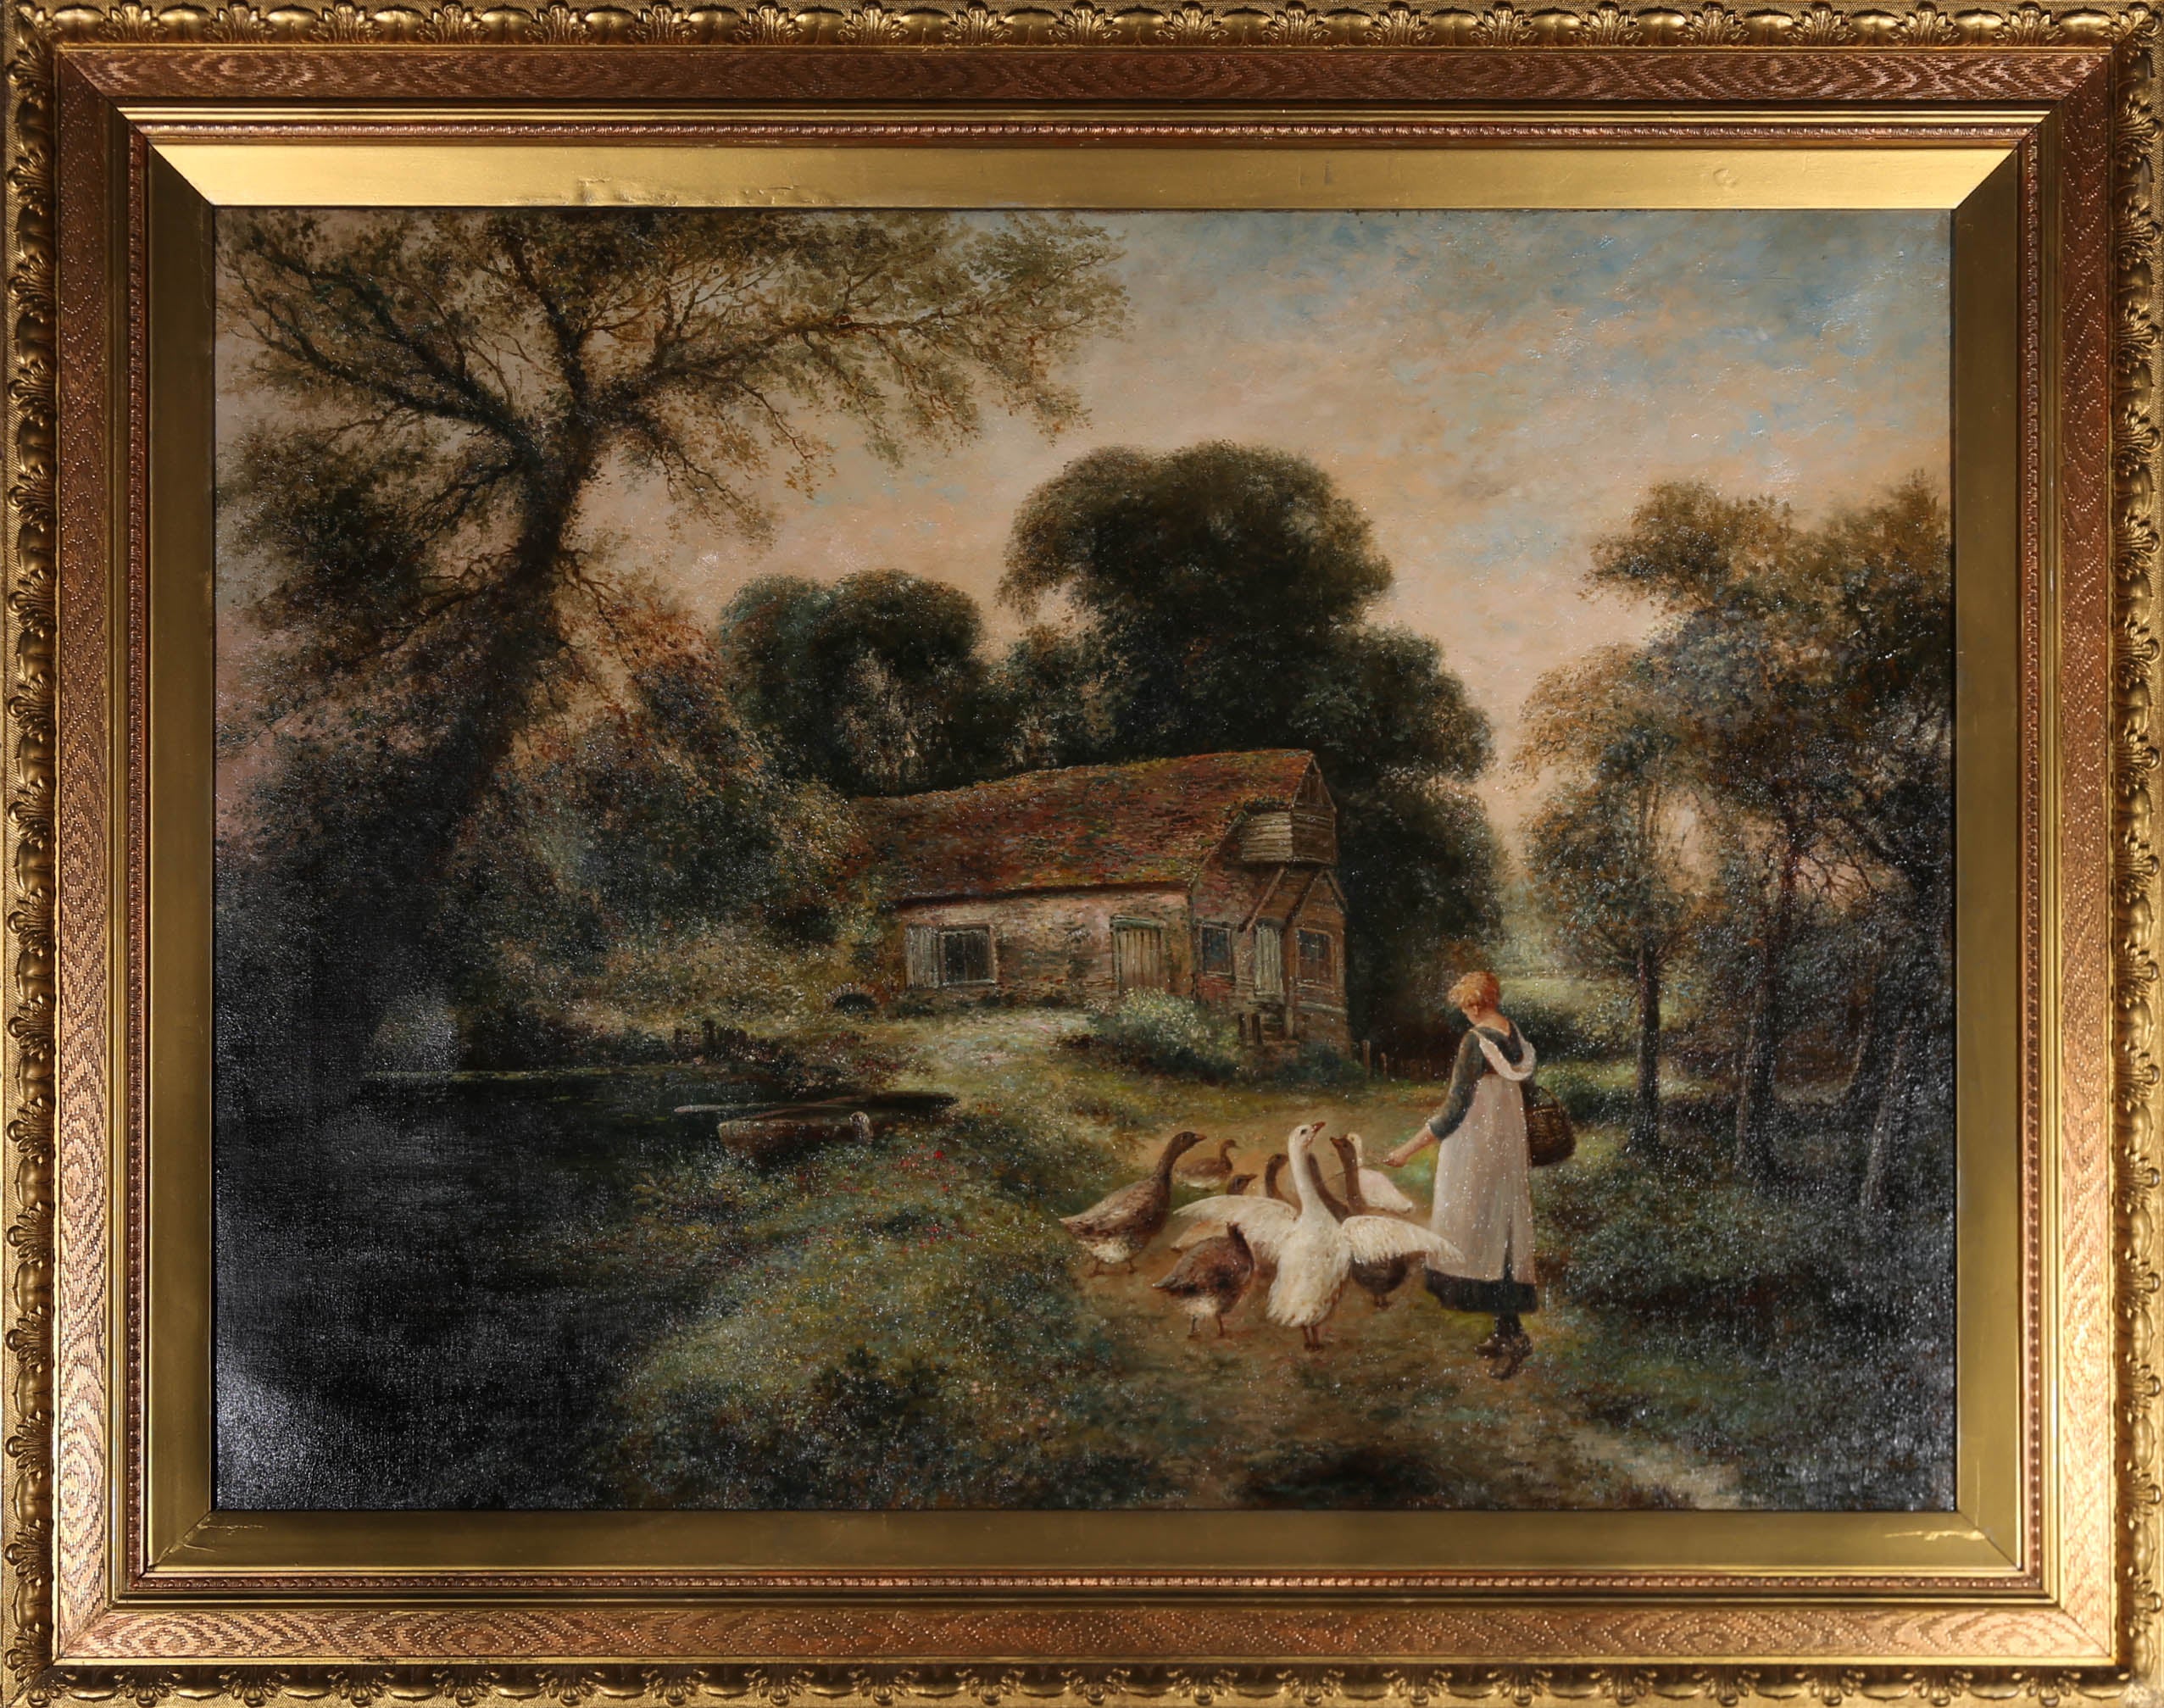 A charming turn of the Century oil scene, showing a young girl herding a flock of geese with a stick, outside of a thatched cottage in a leafy woodland. The artist has signed to the lower left corner and the painting has been presented in a fine